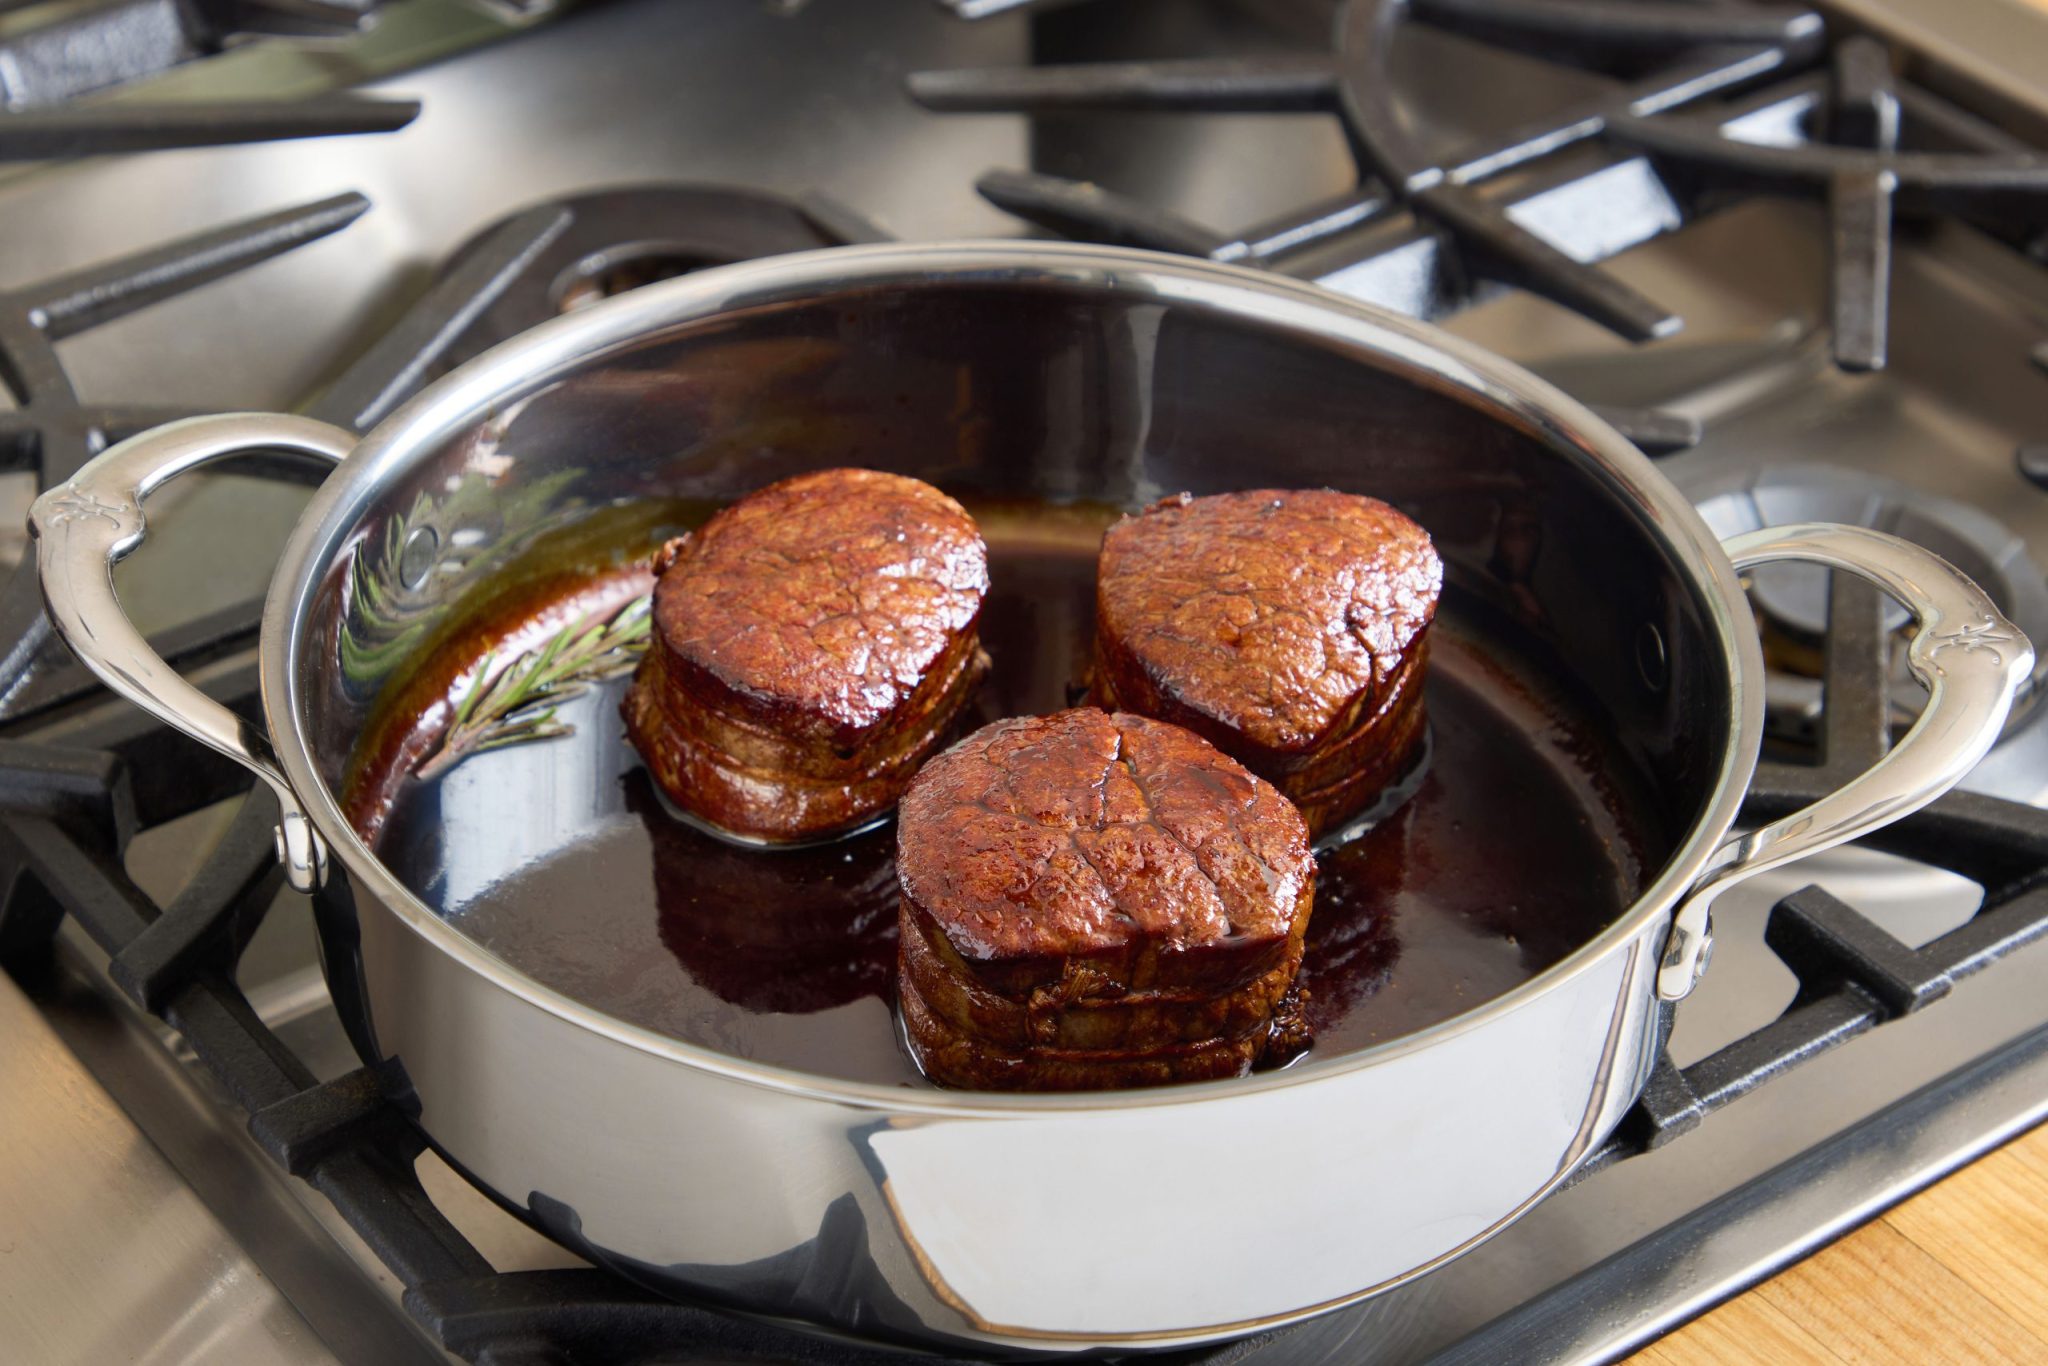 Filet mingon with demi-glace and sprig of rosemary in a Hestan pan on gas stove burner